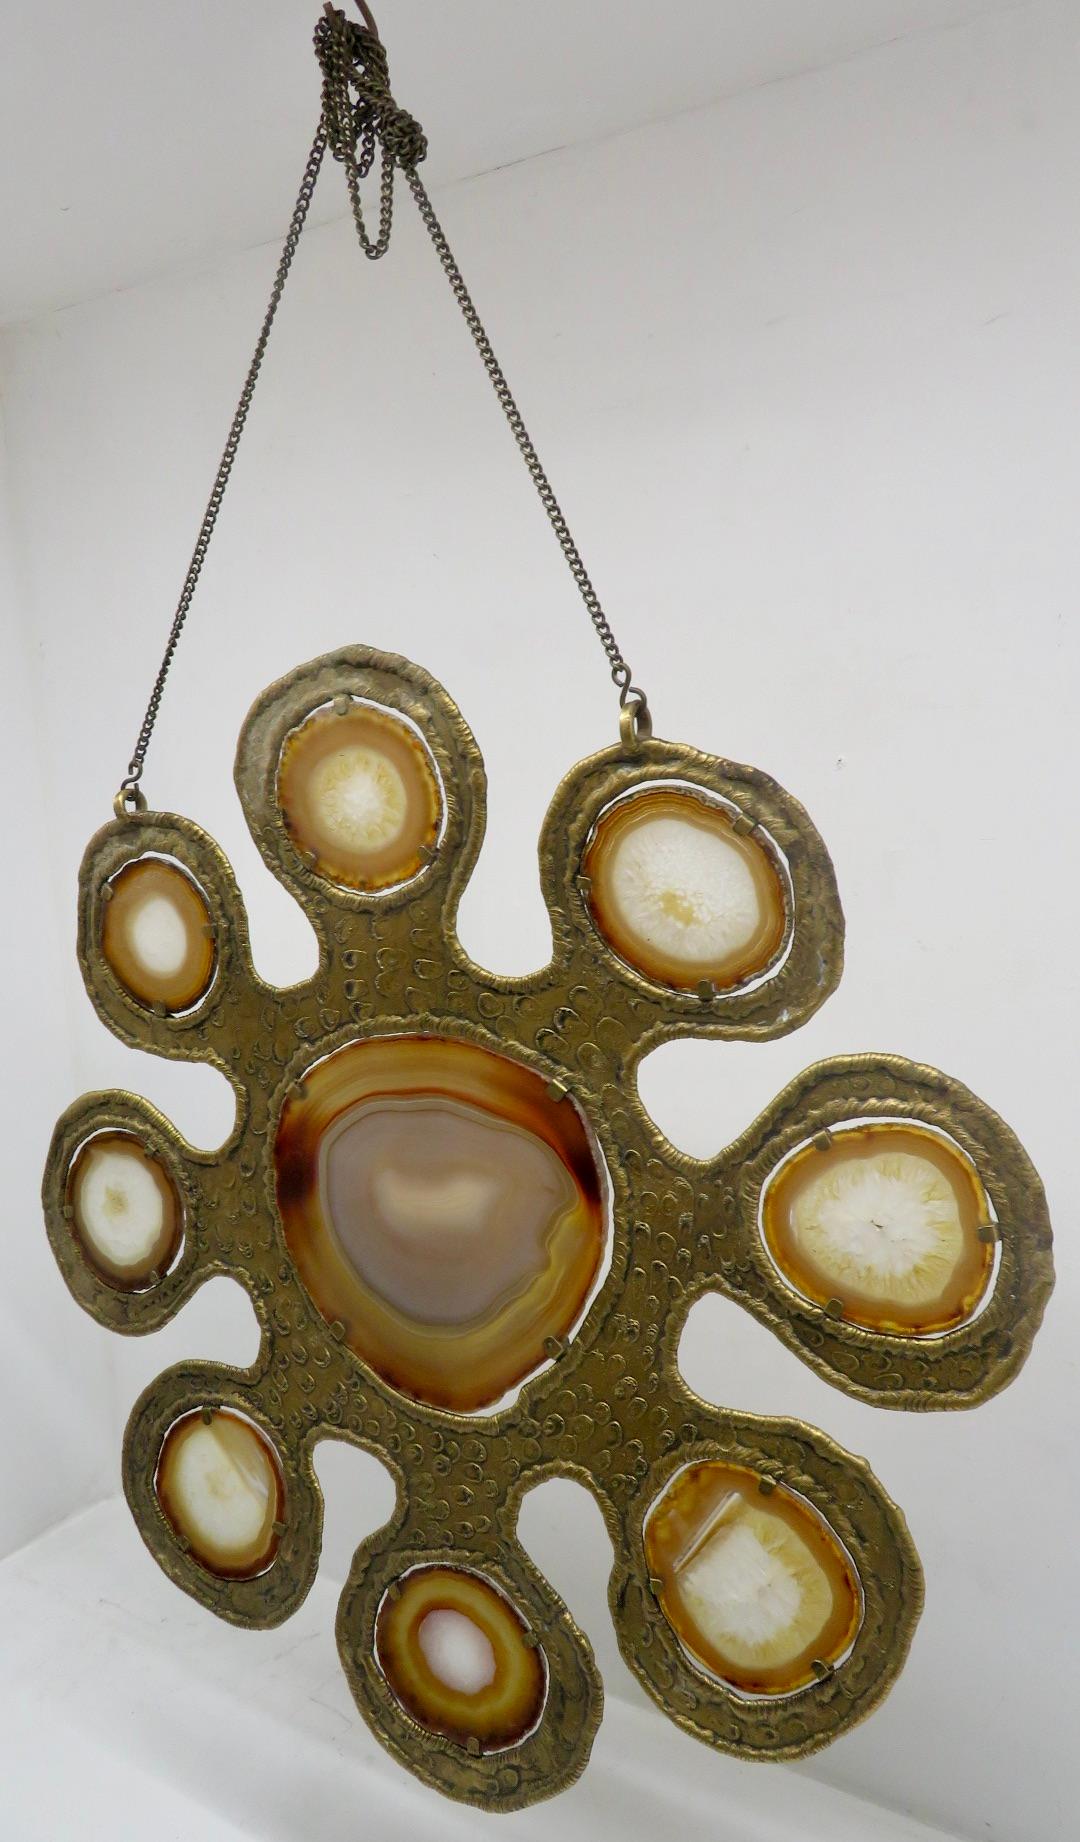 A very interesting 1960's brutalist wall hanging sculpture, constructed from hammered copper with 9 agate gemstone insets. All in wonderful condition, a most unusual and attractive item.